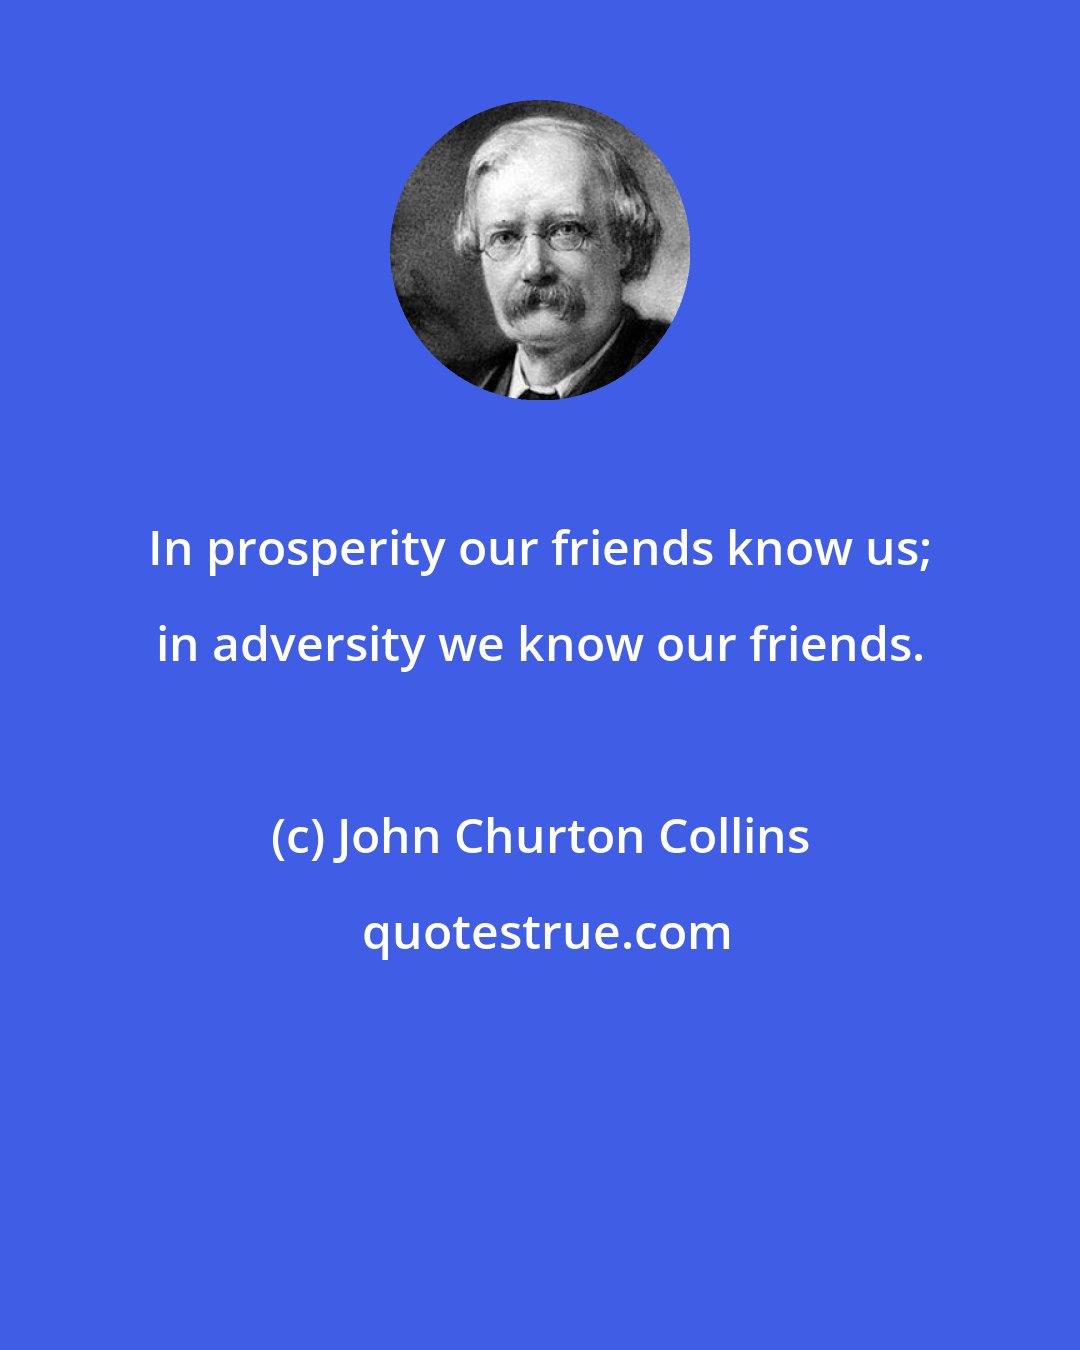 John Churton Collins: In prosperity our friends know us; in adversity we know our friends.